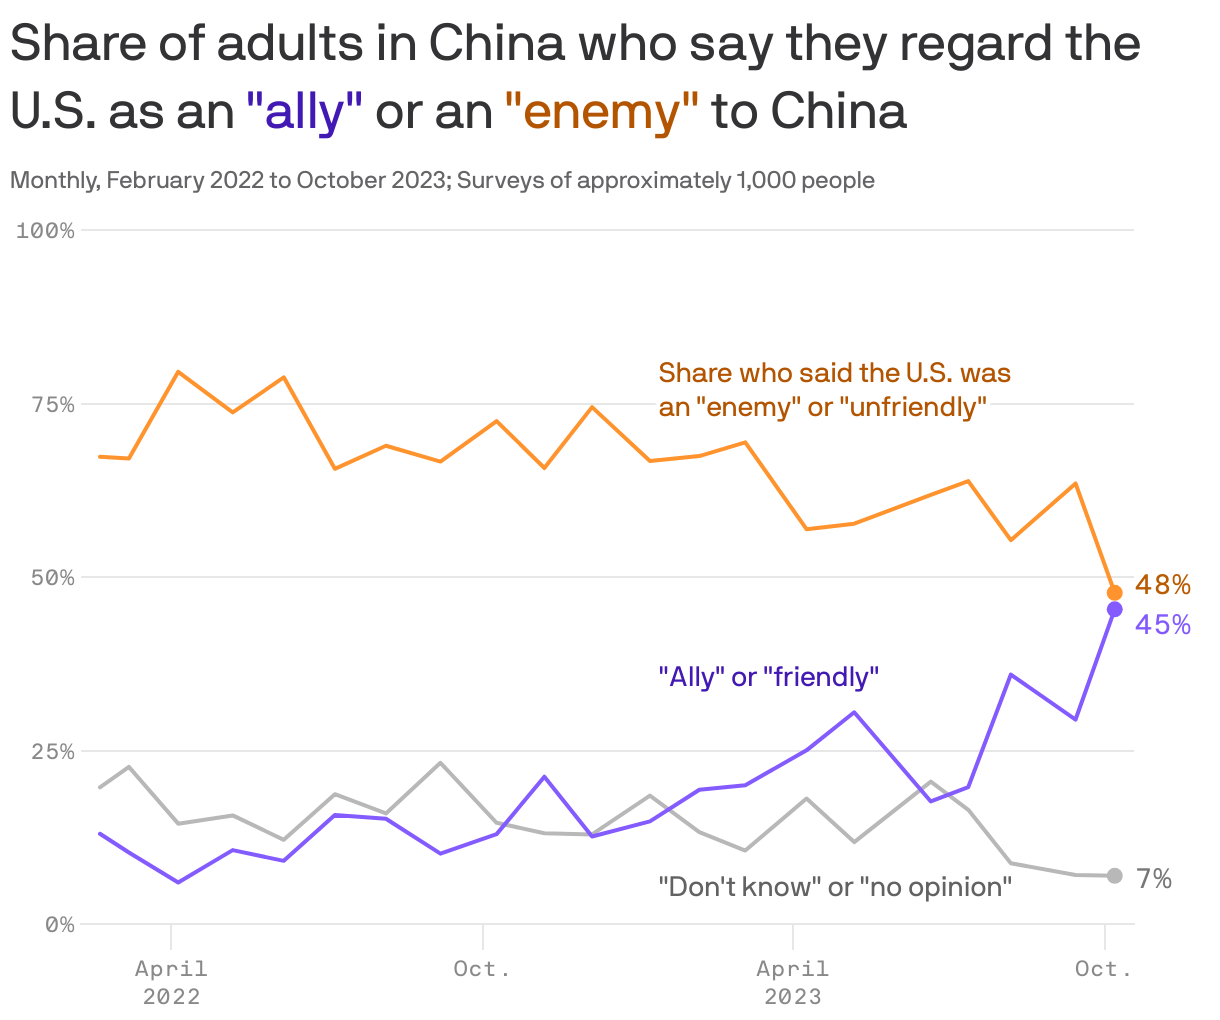 Share of adults in China who say they regard the U.S. as an <span style="color: #421ab3;">"ally"</span> or an <span style="color:#b35500;">"enemy"</span> to China